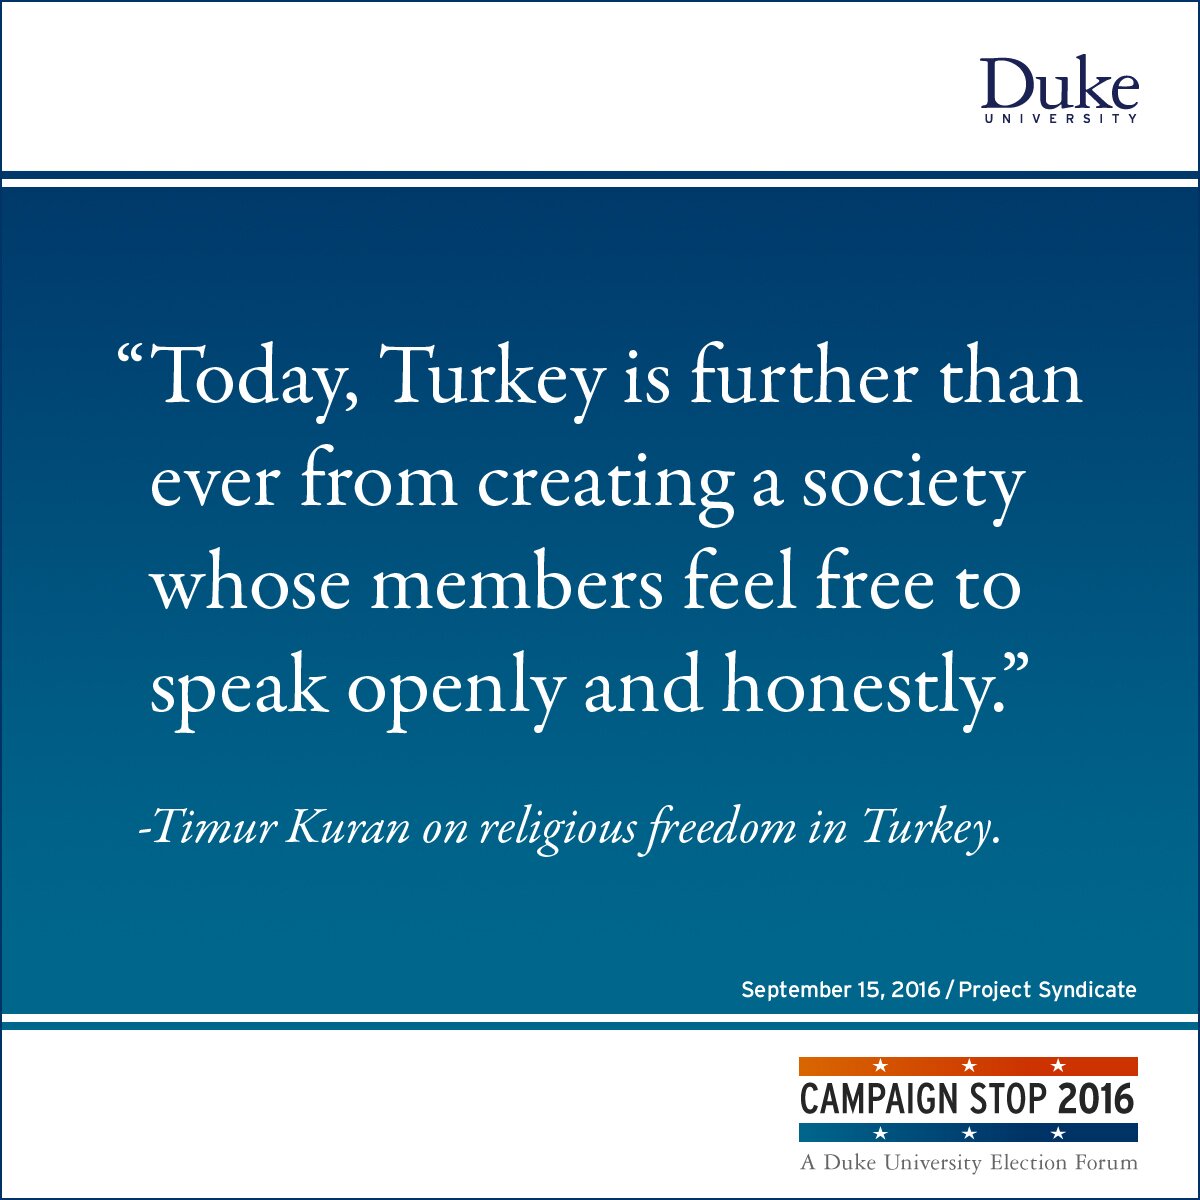 “Today, Turkey is further than ever from creating a society whose members feel free to speak openly and honestly.” -Timur Kuran on religious freedom in Turkey.